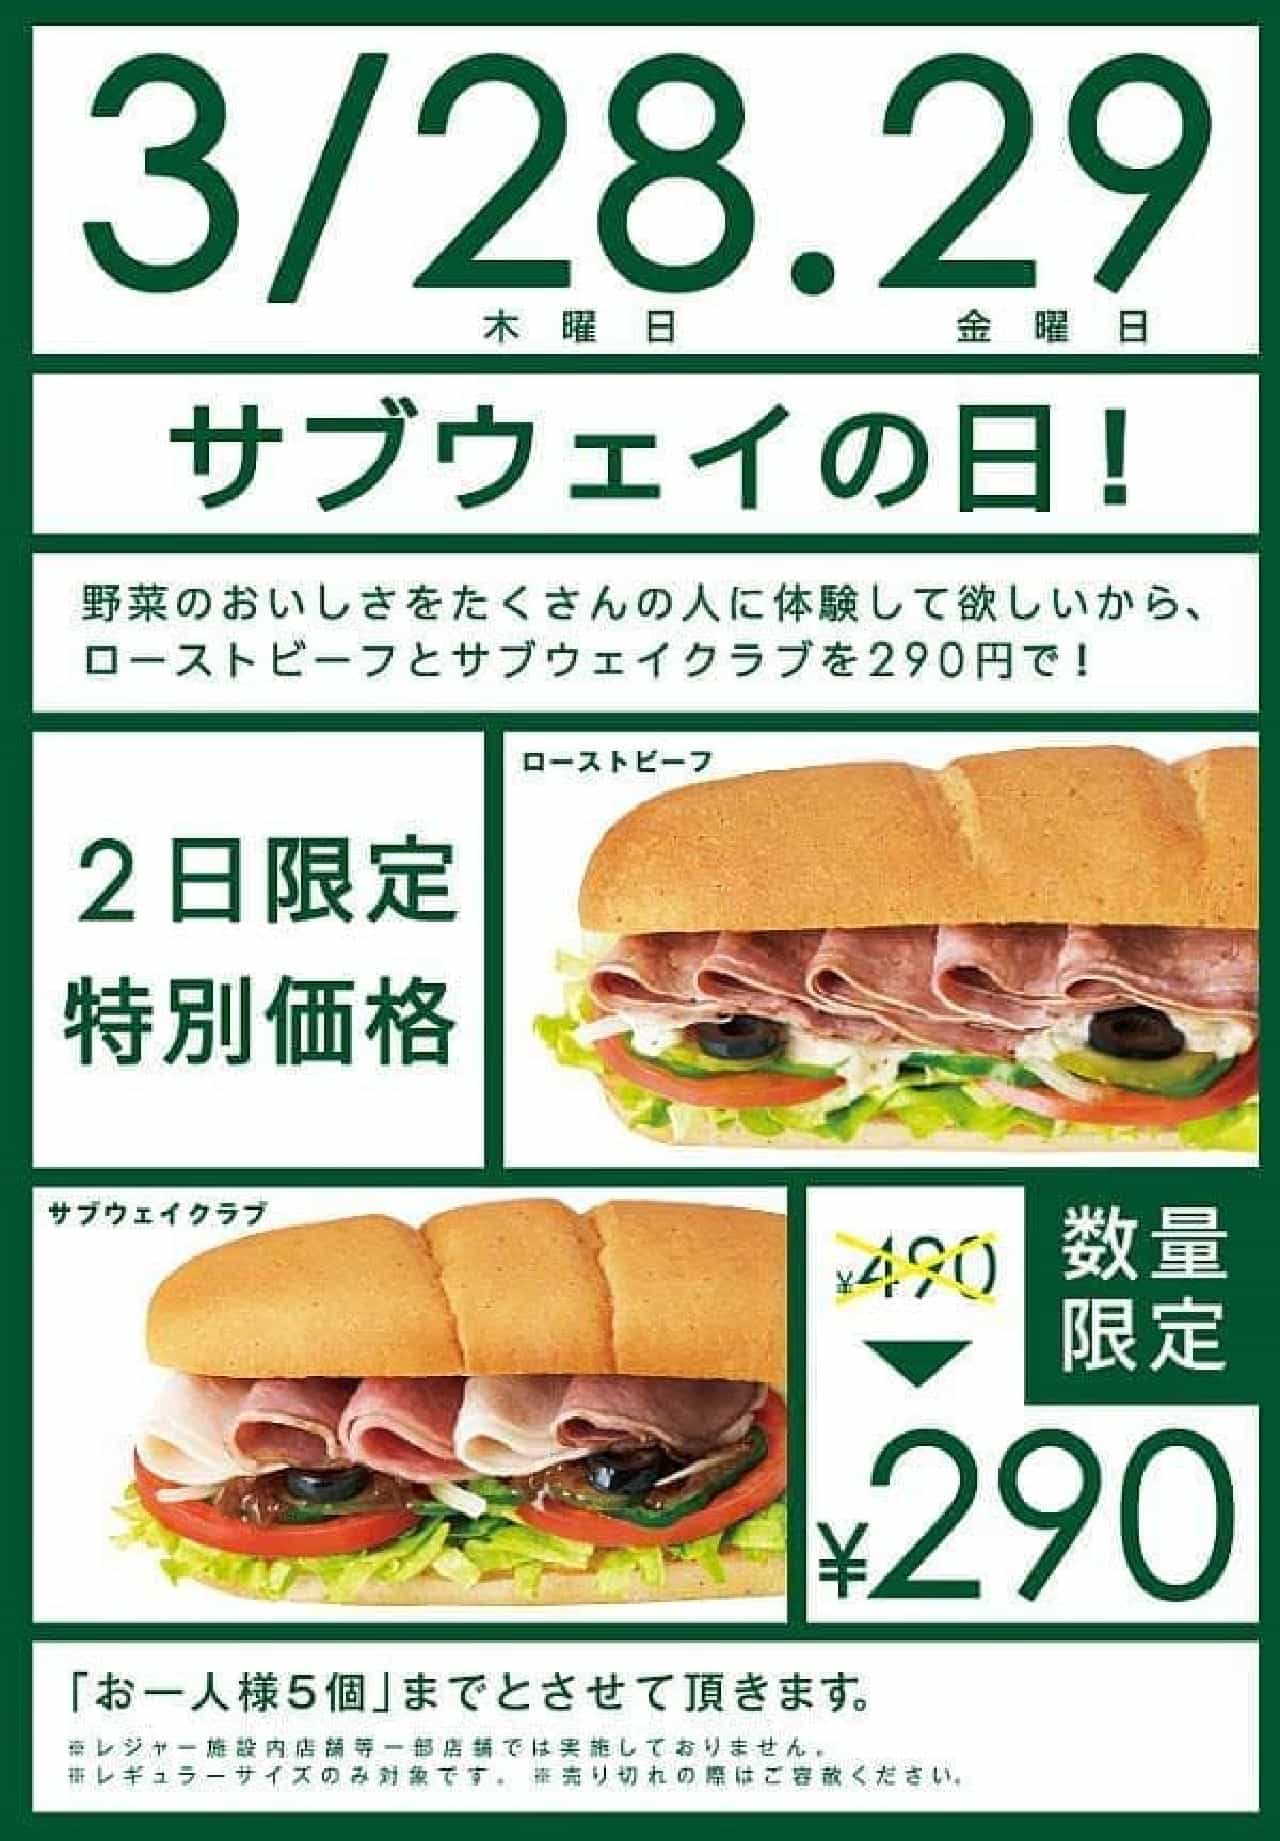 About 40% off "Roast Beef" and "Subway Club"!